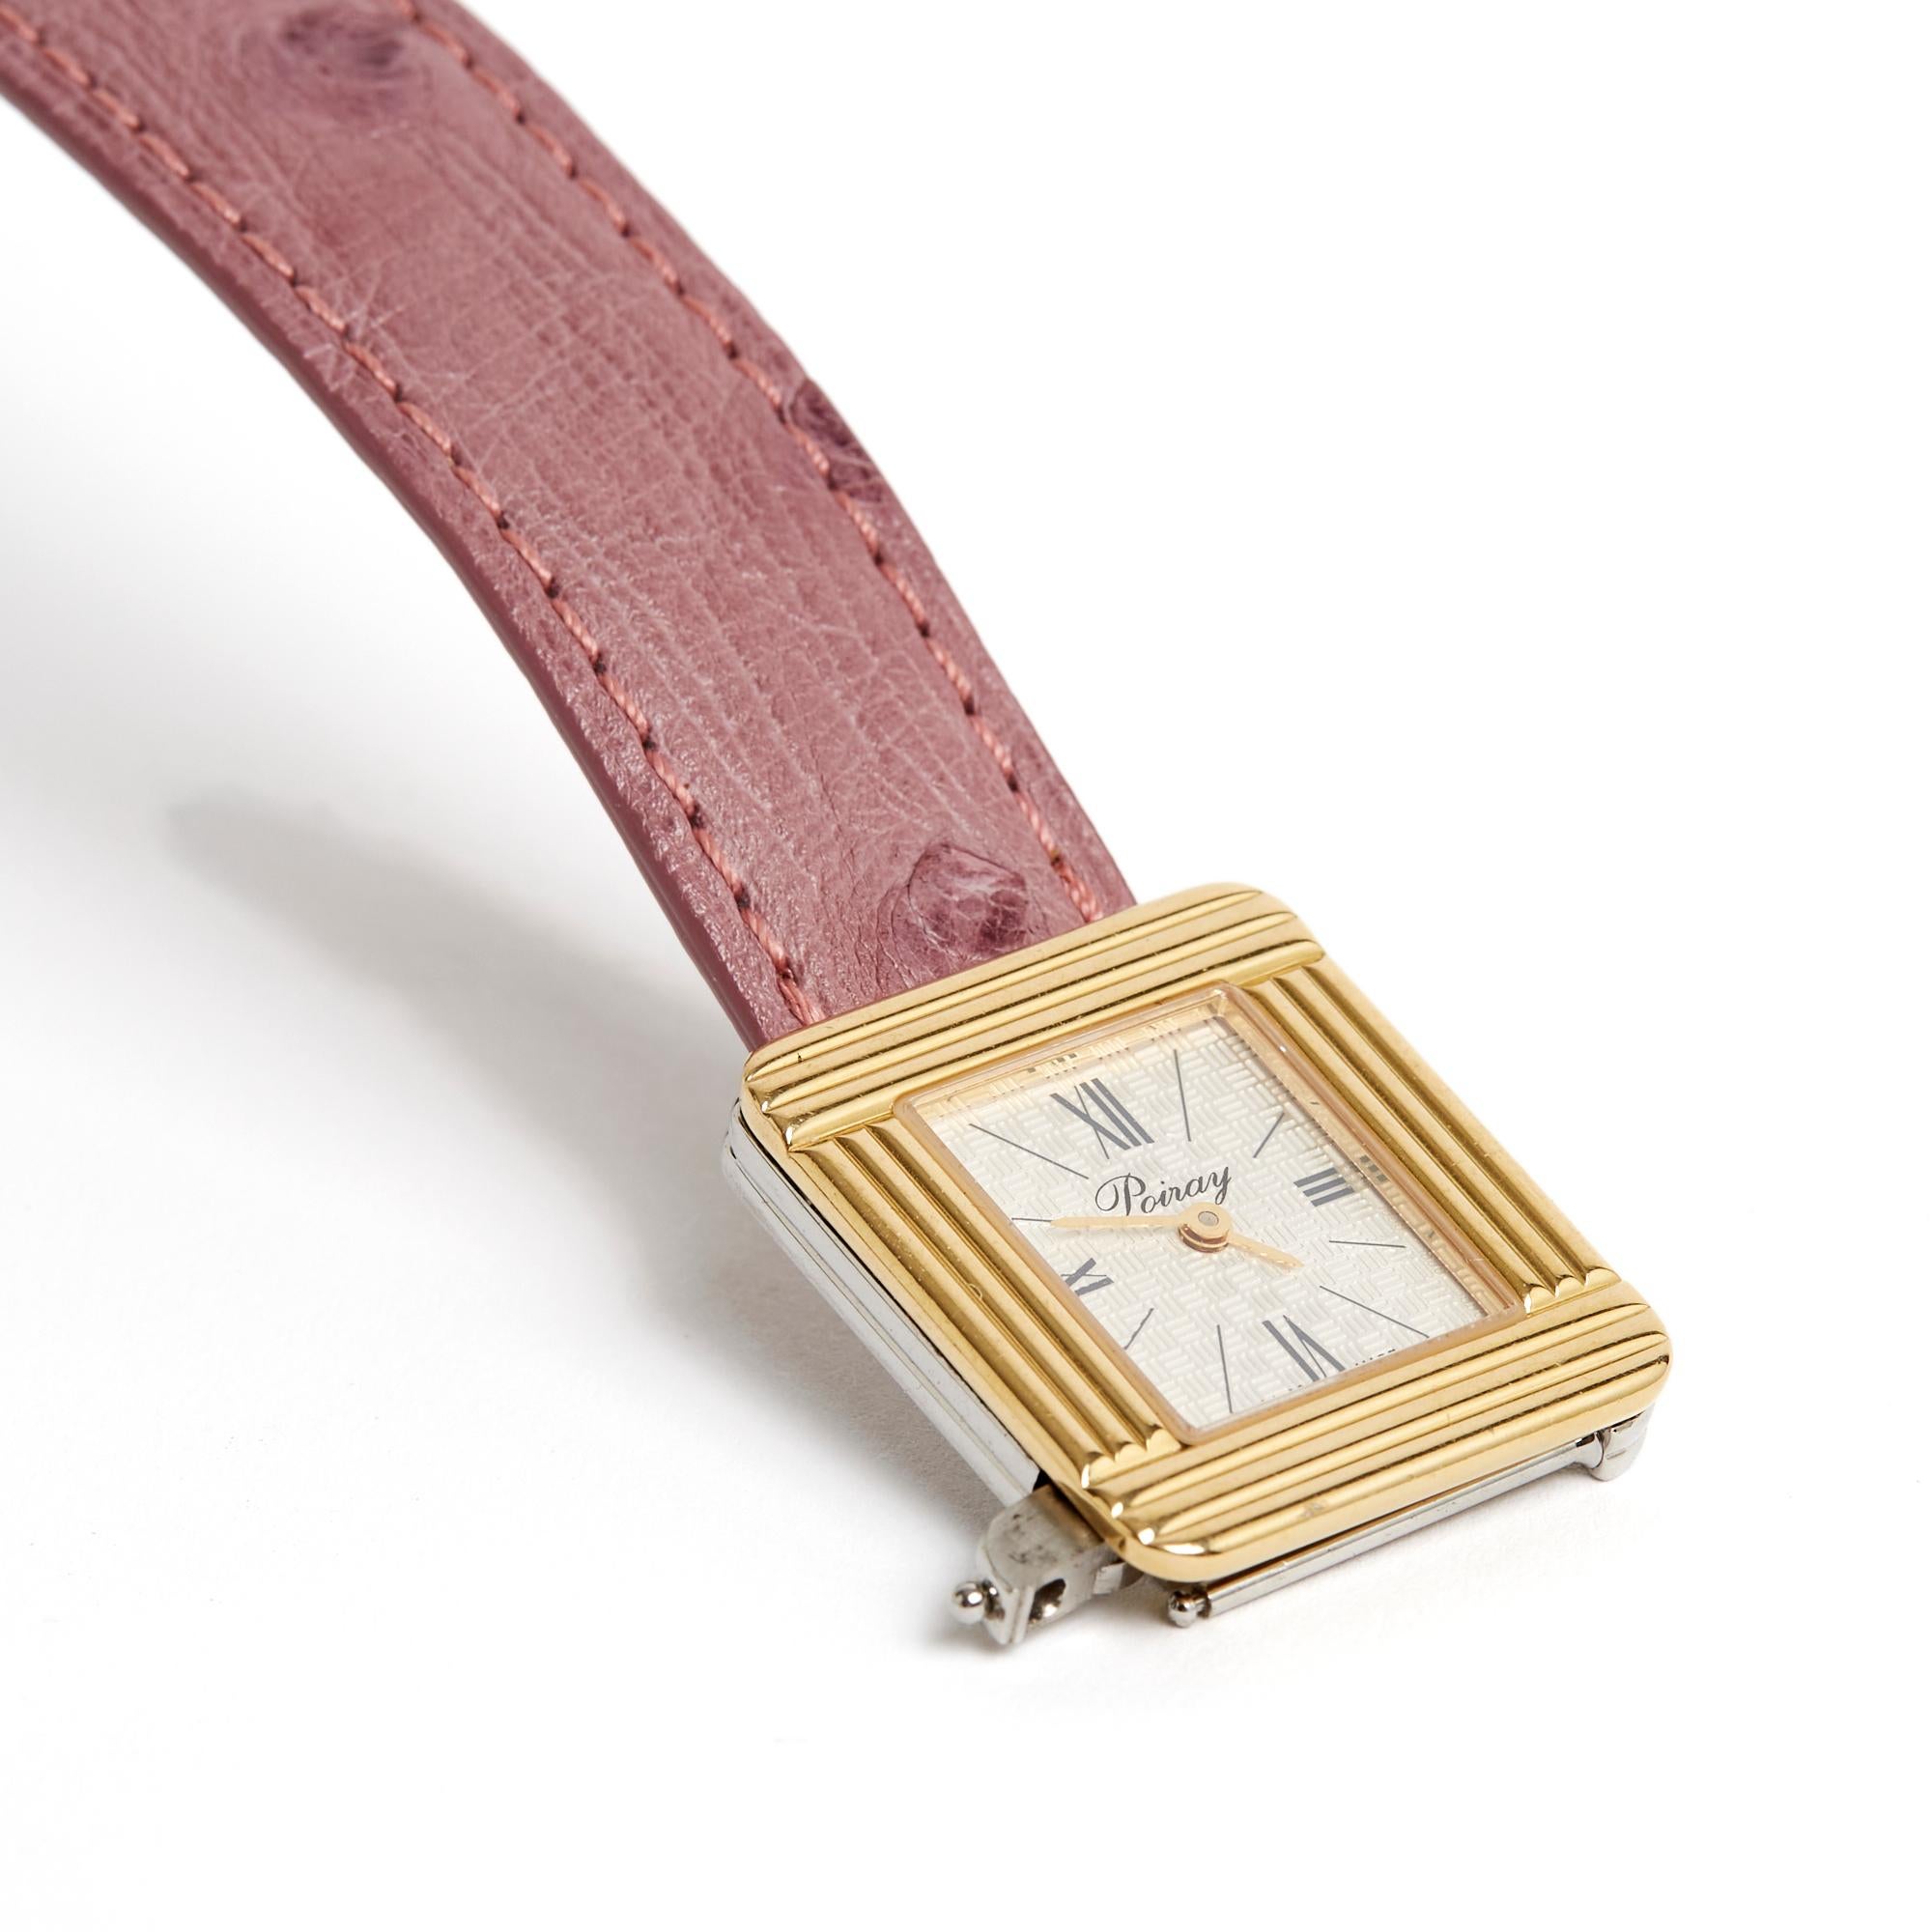 Poiray watch, Ma Première model, in steel and yellow gold, quartz mechanism, silver background with braided pattern, interchangeable leather strap in purple ostrich leather. Diameter of the watch 2.3 cm, length of the bracelet alone 13.6 cm, length